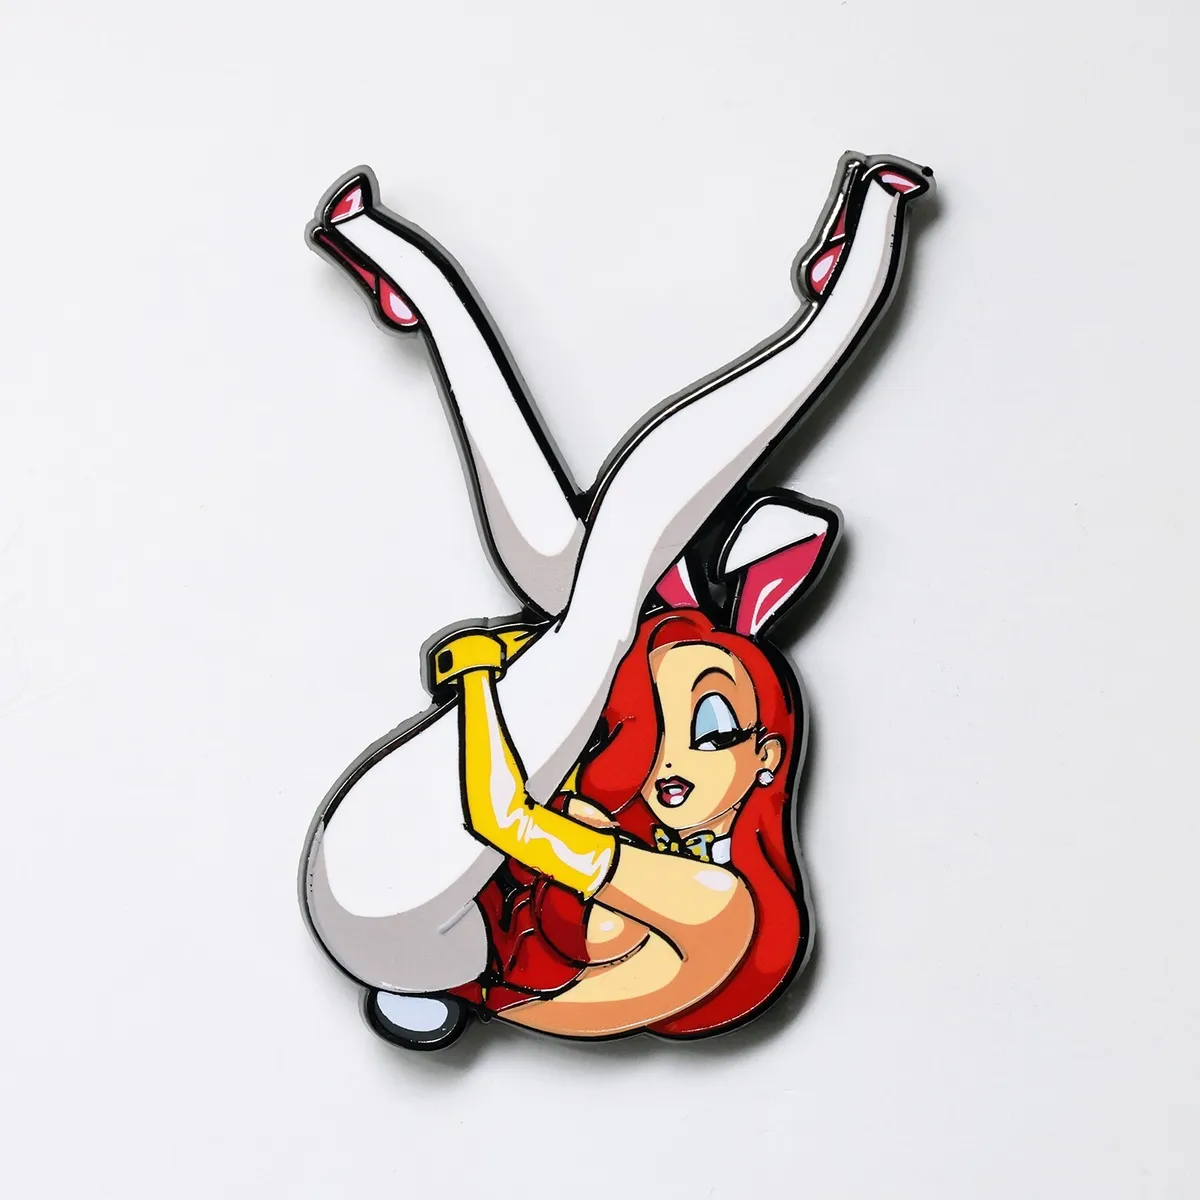 christopher chuong recommends pictures of jessica rabbit and roger rabbit pic